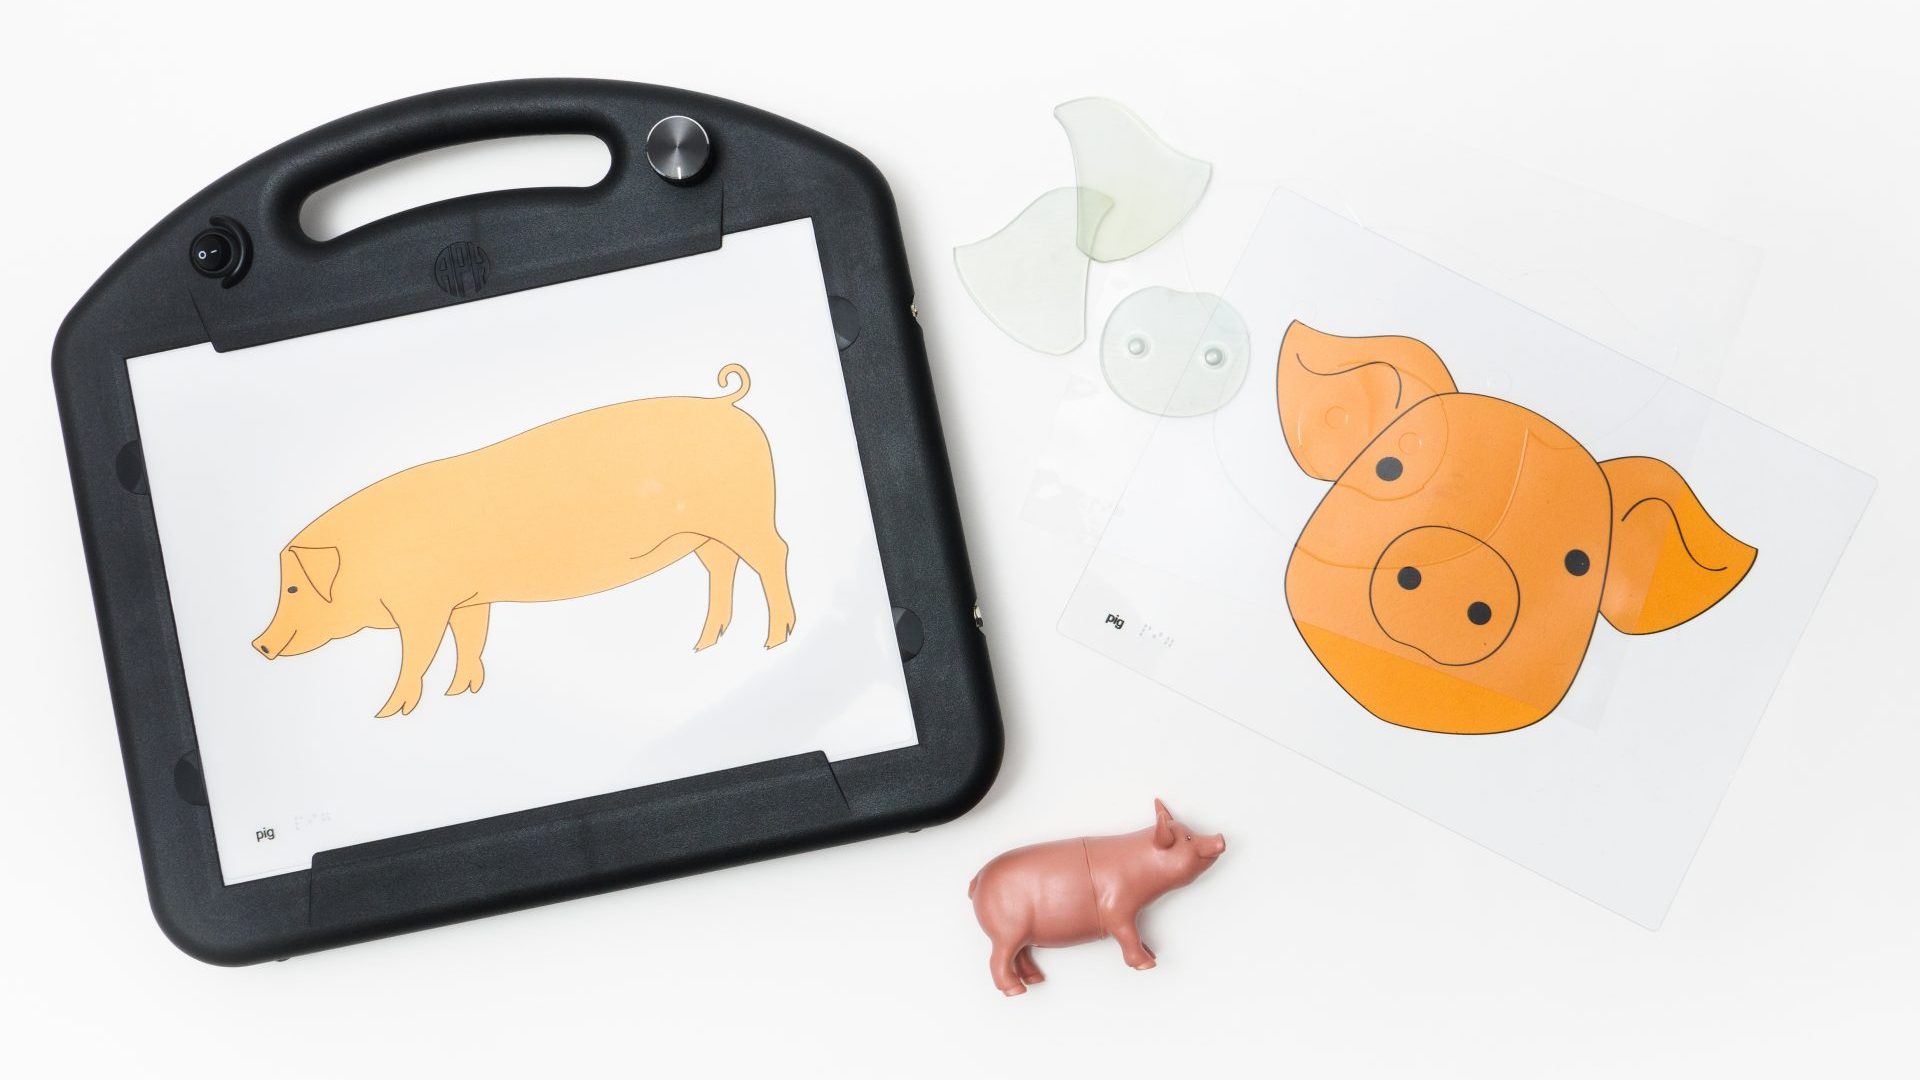 set of animal recipe pieces for the pig kit including 3D model, full body color overlay and raised line overlay on mini lite box, face overlay and raised overlay, and puzzle pieces.